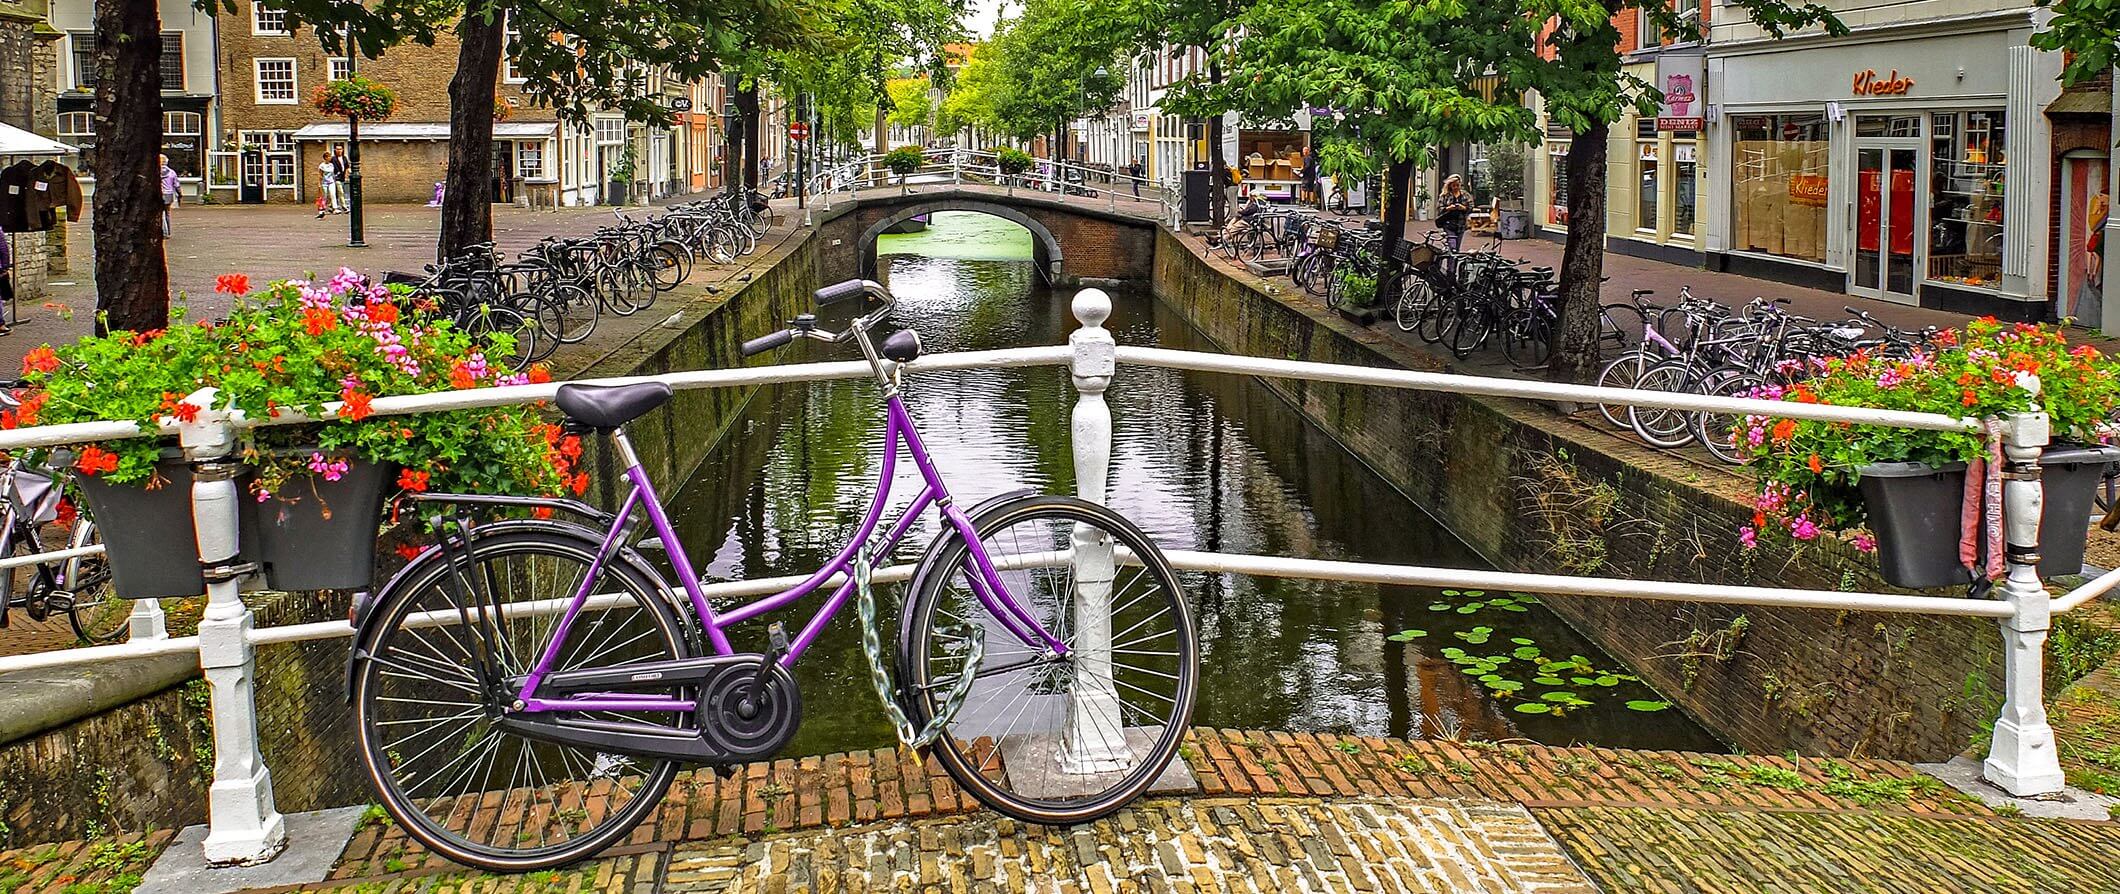 a bike chained up on a bridge crossing a canal in Amsterdam